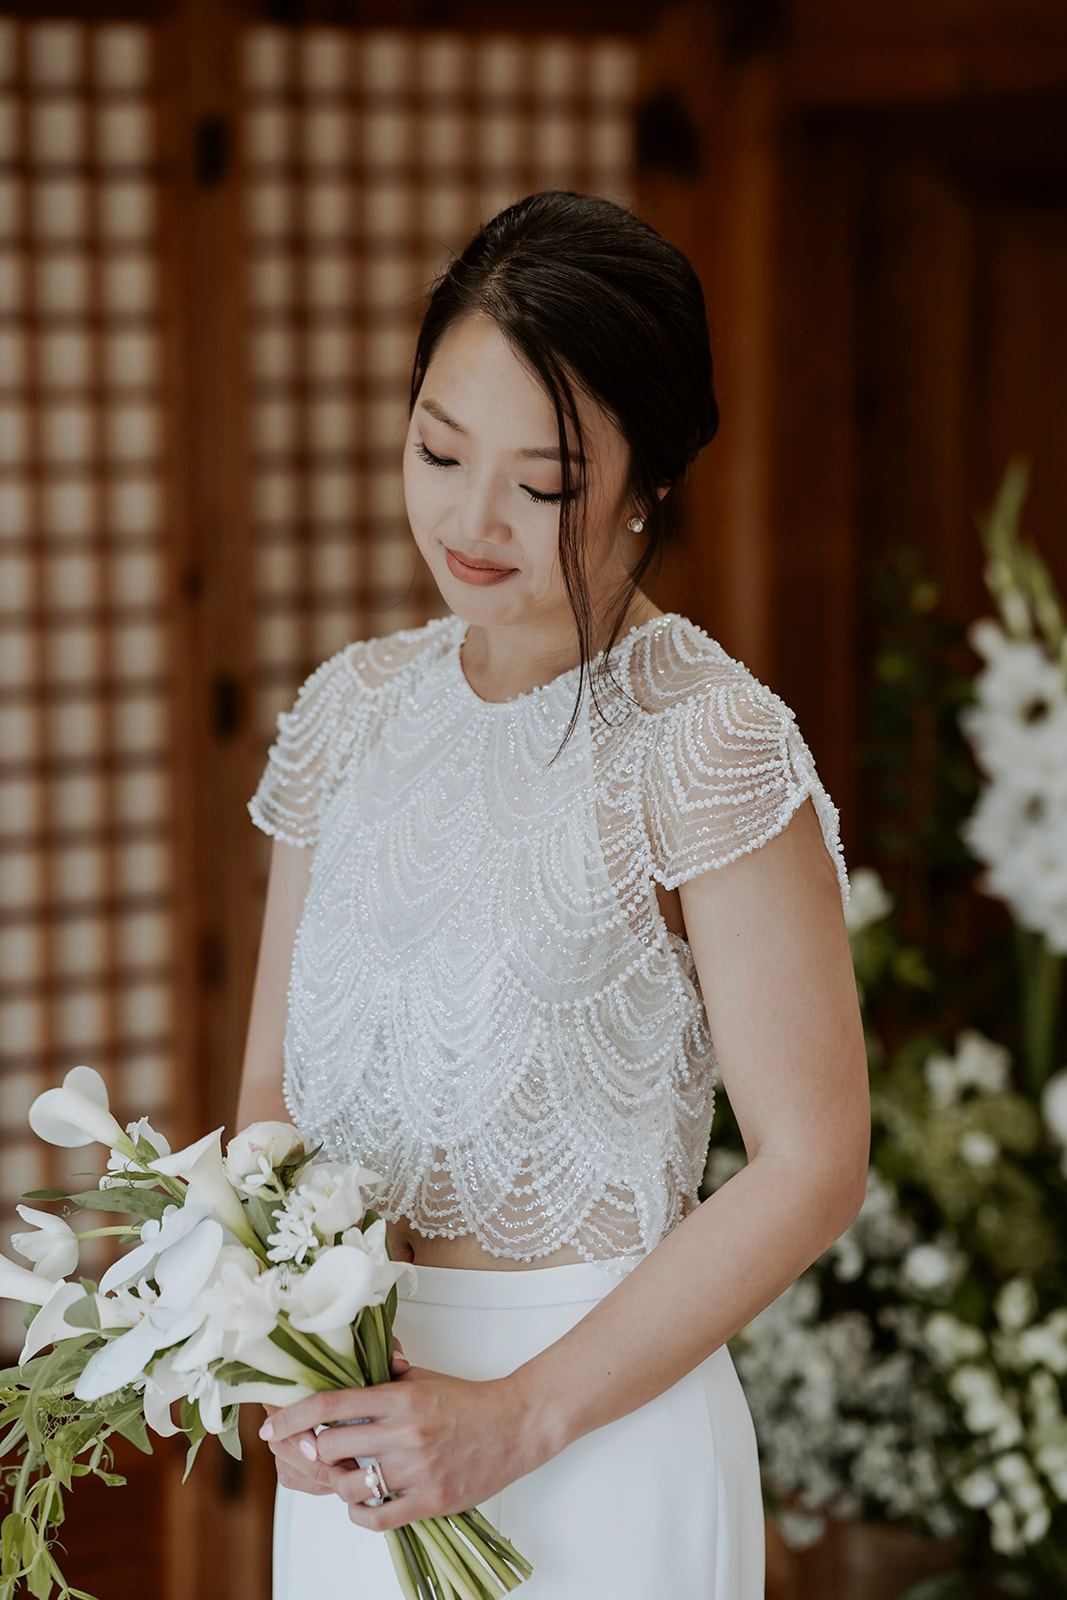 A bride holding a bouquet of white flowers on her wedding day.